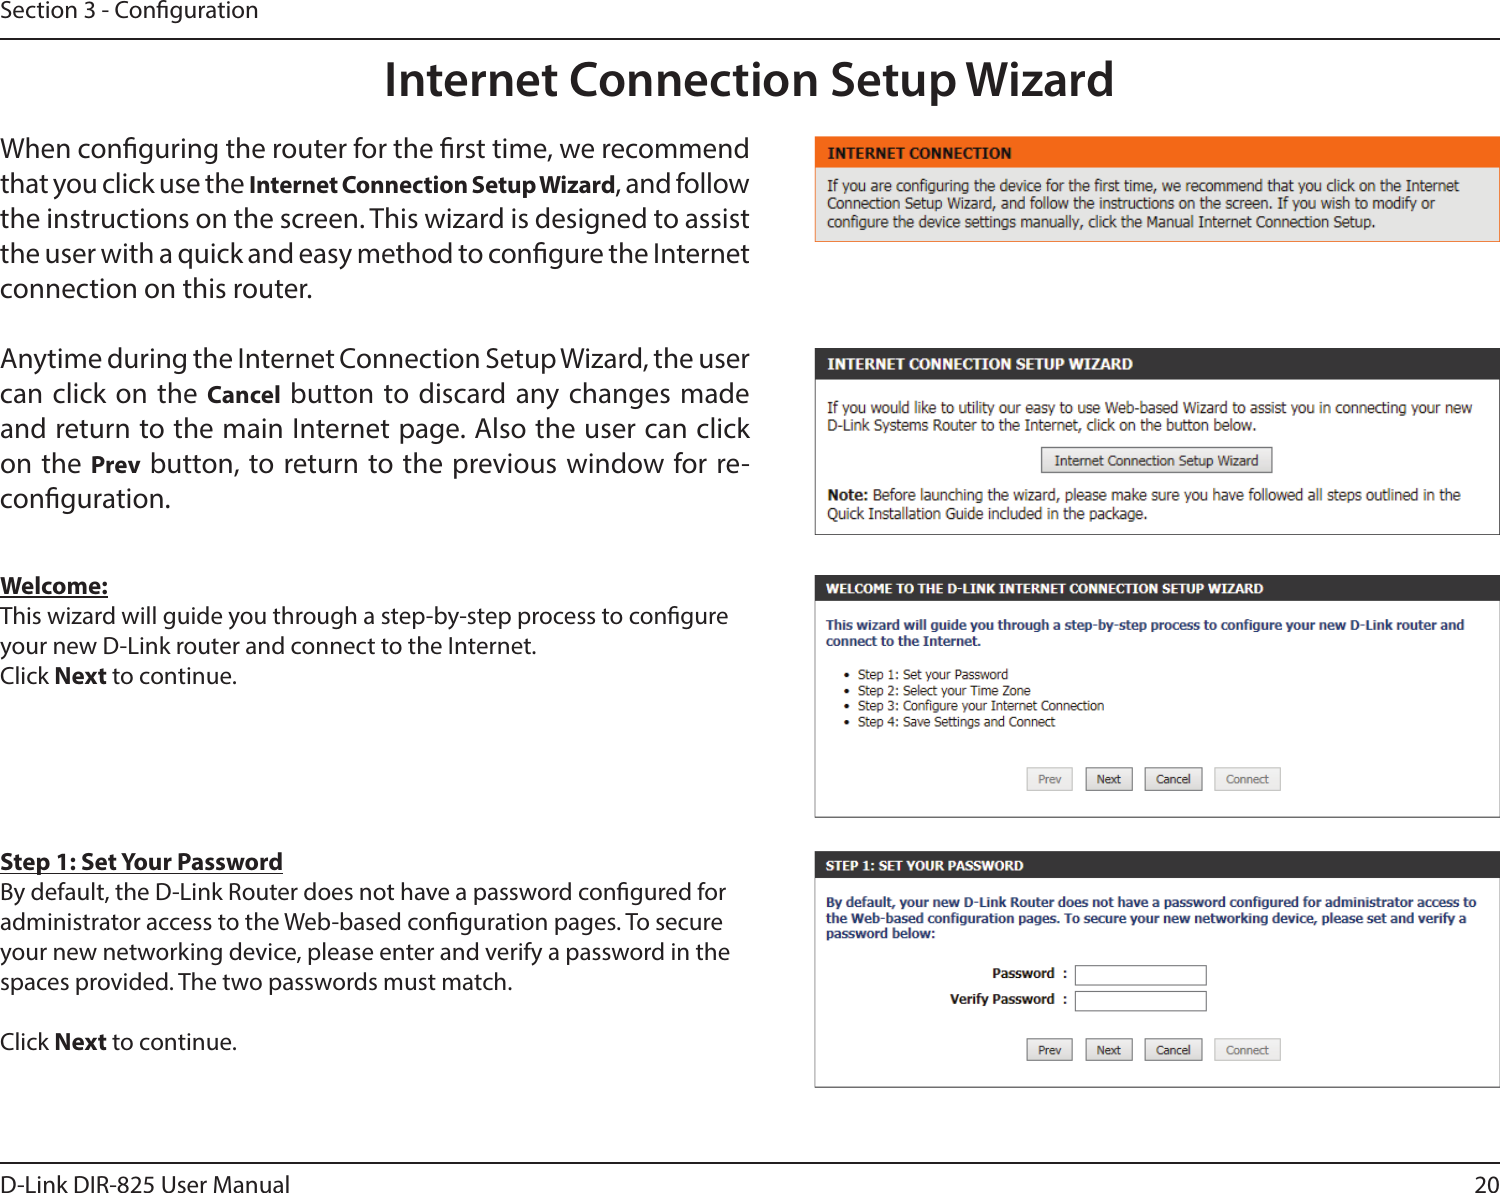 20D-Link DIR-825 User ManualSection 3 - CongurationInternet Connection Setup WizardWhen conguring the router for the rst time, we recommend that you click use the Internet Connection Setup Wizard, and follow the instructions on the screen. This wizard is designed to assist the user with a quick and easy method to congure the Internet connection on this router.Anytime during the Internet Connection Setup Wizard, the user can click on the Cancel button to discard any changes made and return to the main Internet page. Also the user can click on the Prev button, to return to the previous window for re-conguration.Welcome:This wizard will guide you through a step-by-step process to congure your new D-Link router and connect to the Internet. Click Next to continue.Step 1: Set Your PasswordBy default, the D-Link Router does not have a password congured for administrator access to the Web-based conguration pages. To secure your new networking device, please enter and verify a password in the spaces provided. The two passwords must match.Click Next to continue.